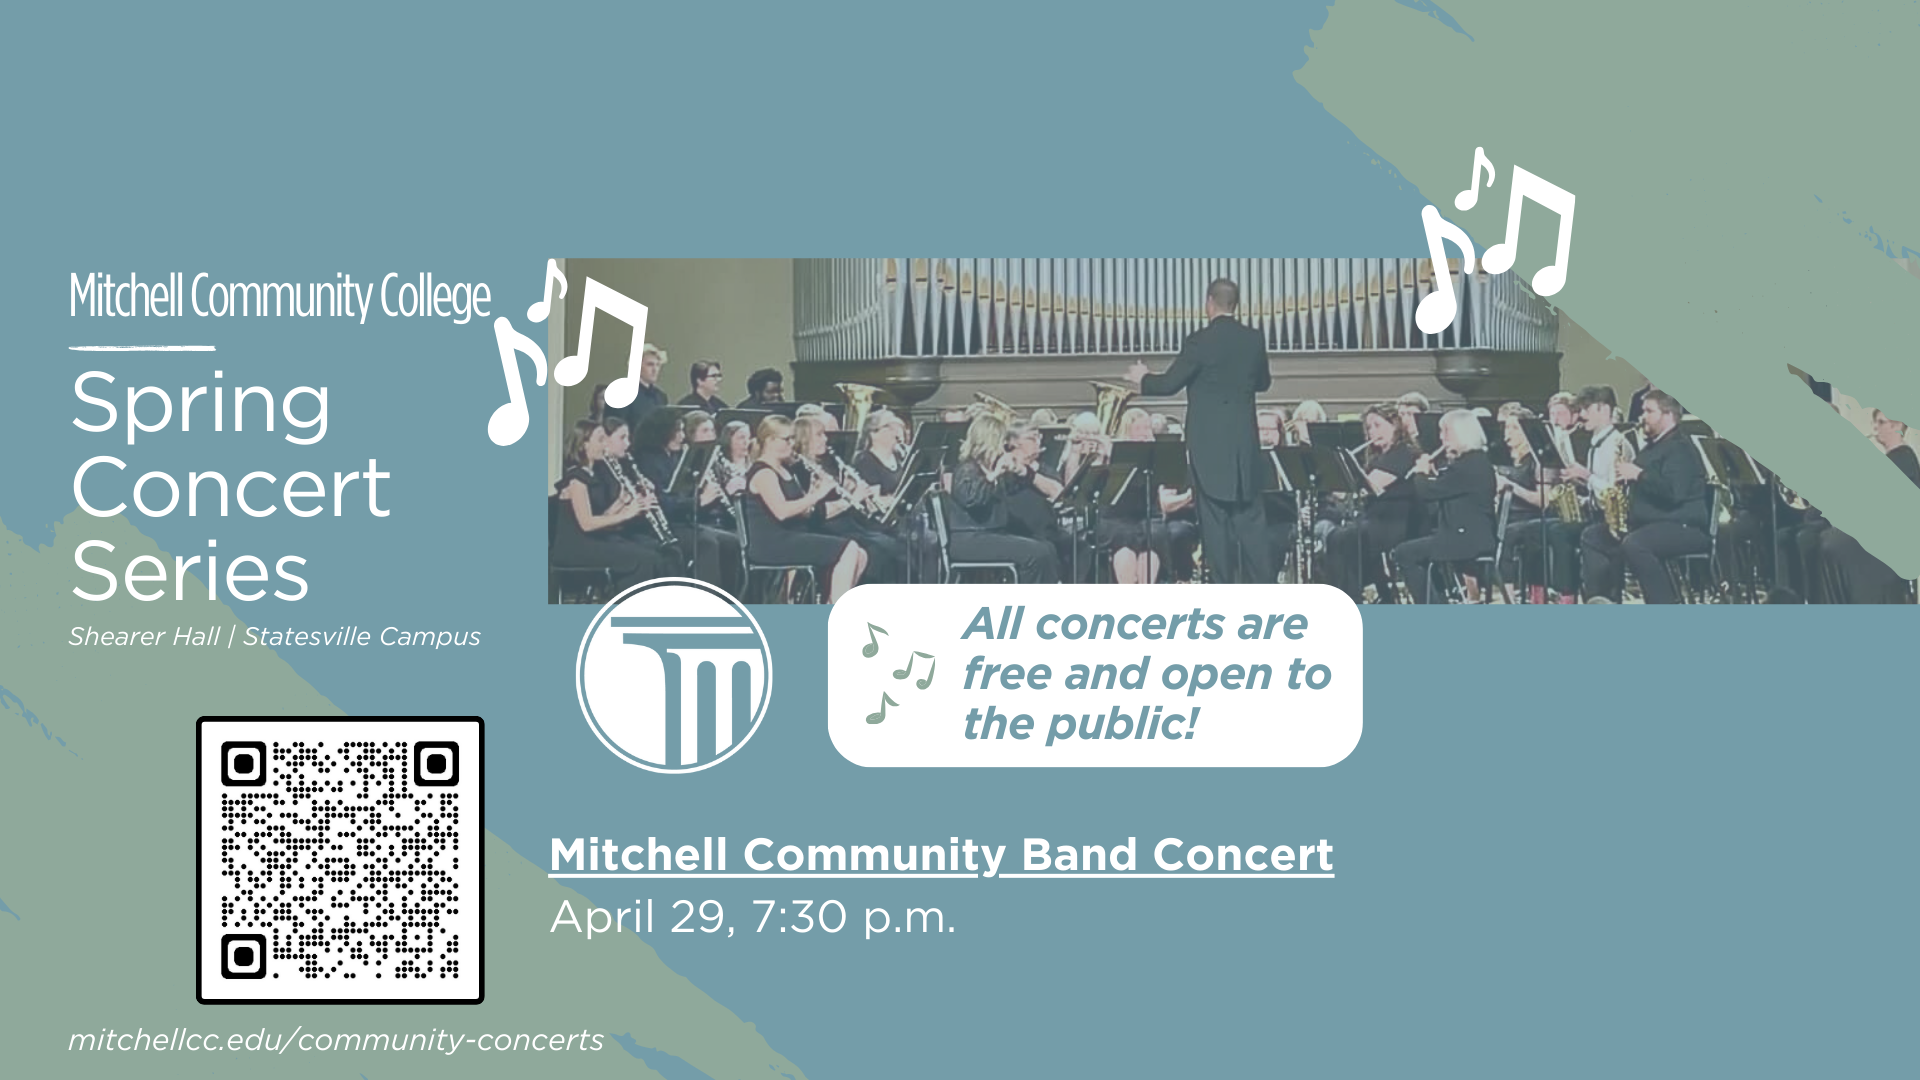 Banner that reads "Mitchell Community College Spring Concert Series | Shearer Hall | Statesville Campus | Mitchell Community Band Concert - April 29, 7:30 p.m. | Spring Choral Concert - May 7, 7:30 p.m. | All concerts are free and open to the public!". Click the banner to learn more.